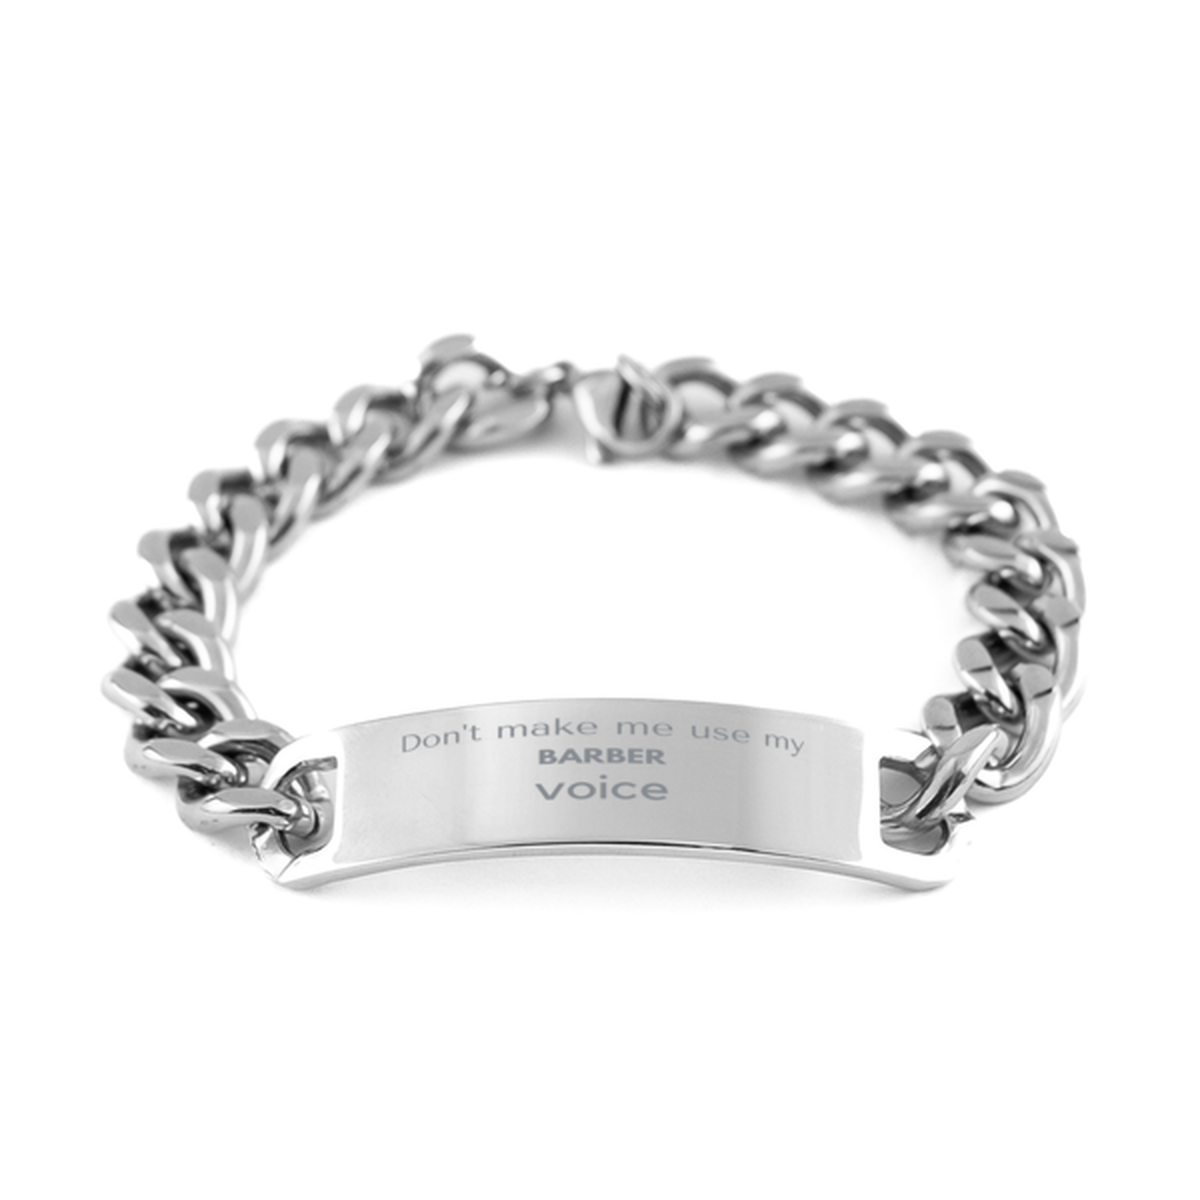 Don't make me use my Barber voice, Sarcasm Barber Gifts, Christmas Barber Cuban Chain Stainless Steel Bracelet Birthday Unique Gifts For Barber Coworkers, Men, Women, Colleague, Friends